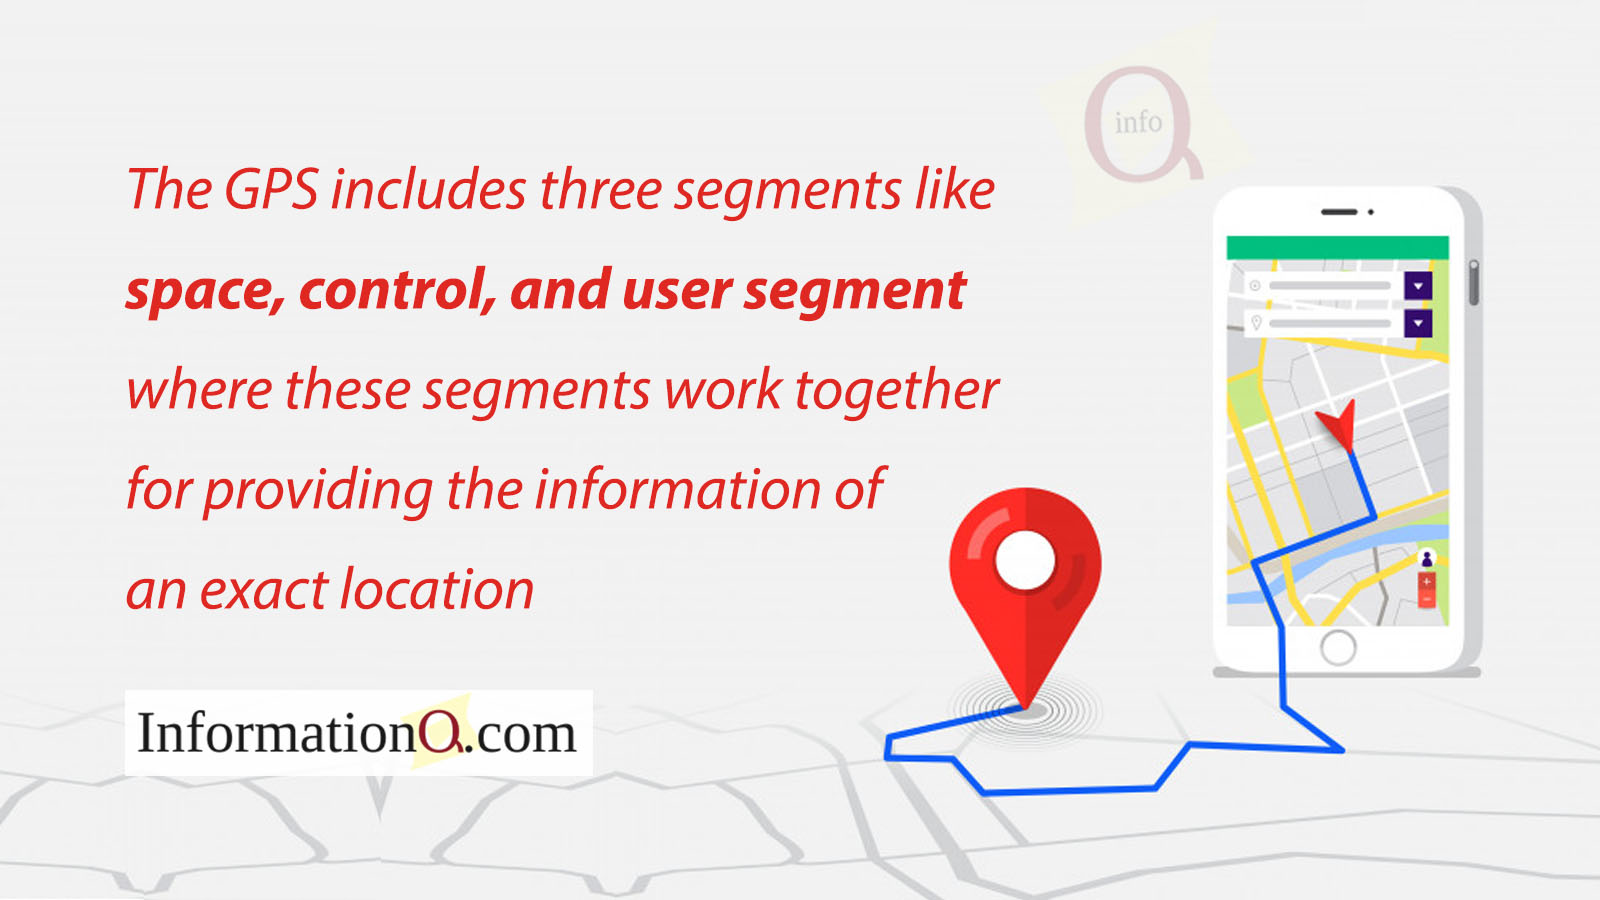 The GPS includes three segments like space, control, and user segment where these segments work together for providing the information of an exact location.